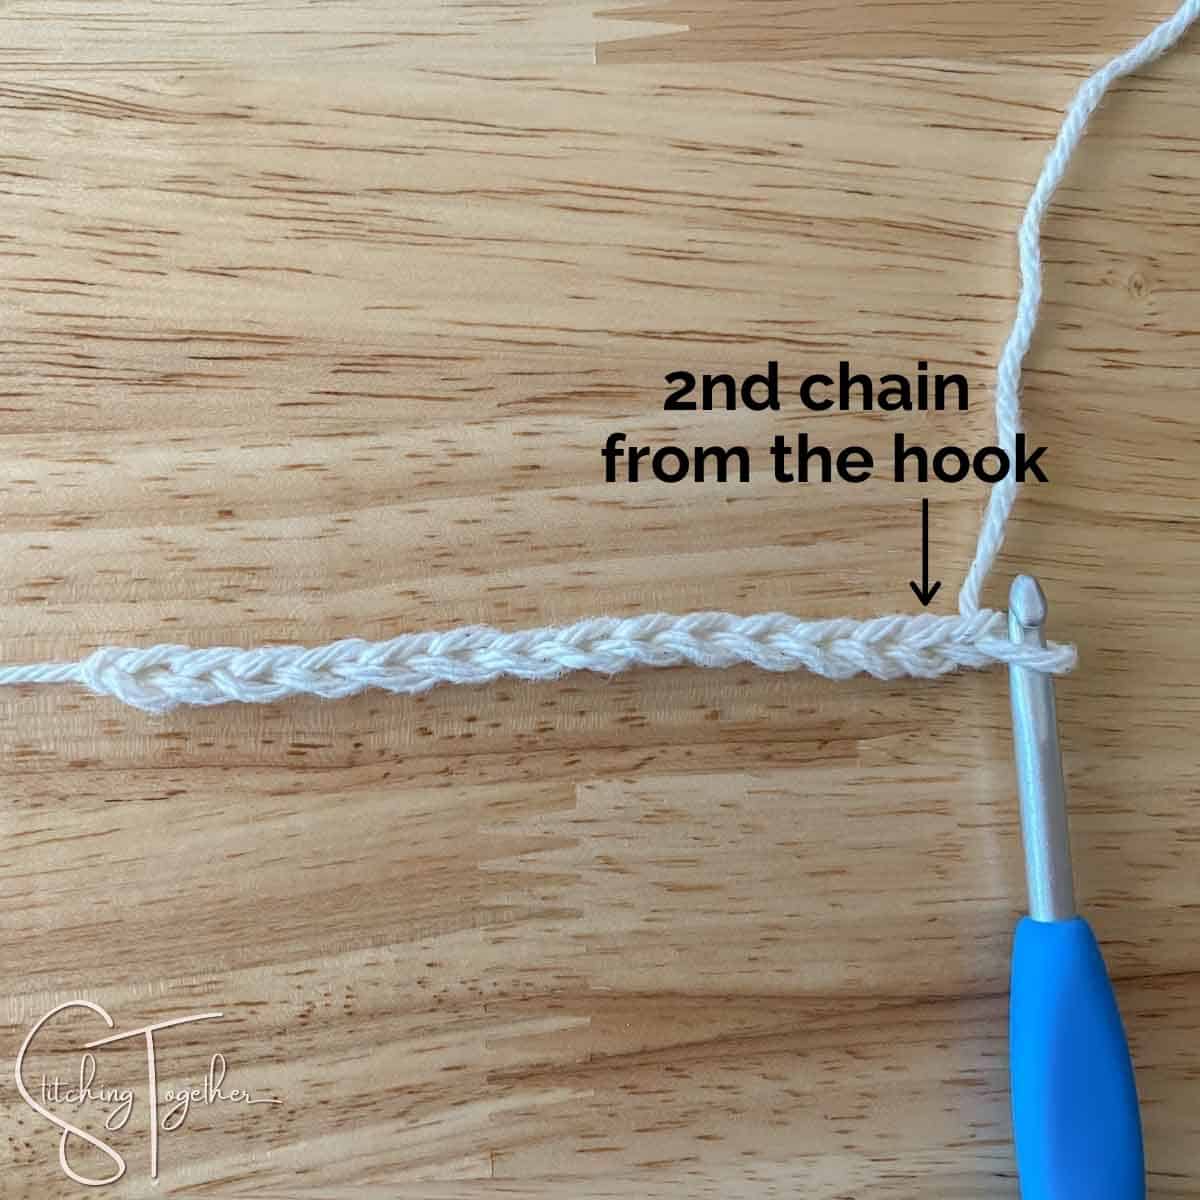 crochet chain and hook with instructions showing where to find the 2nd chain